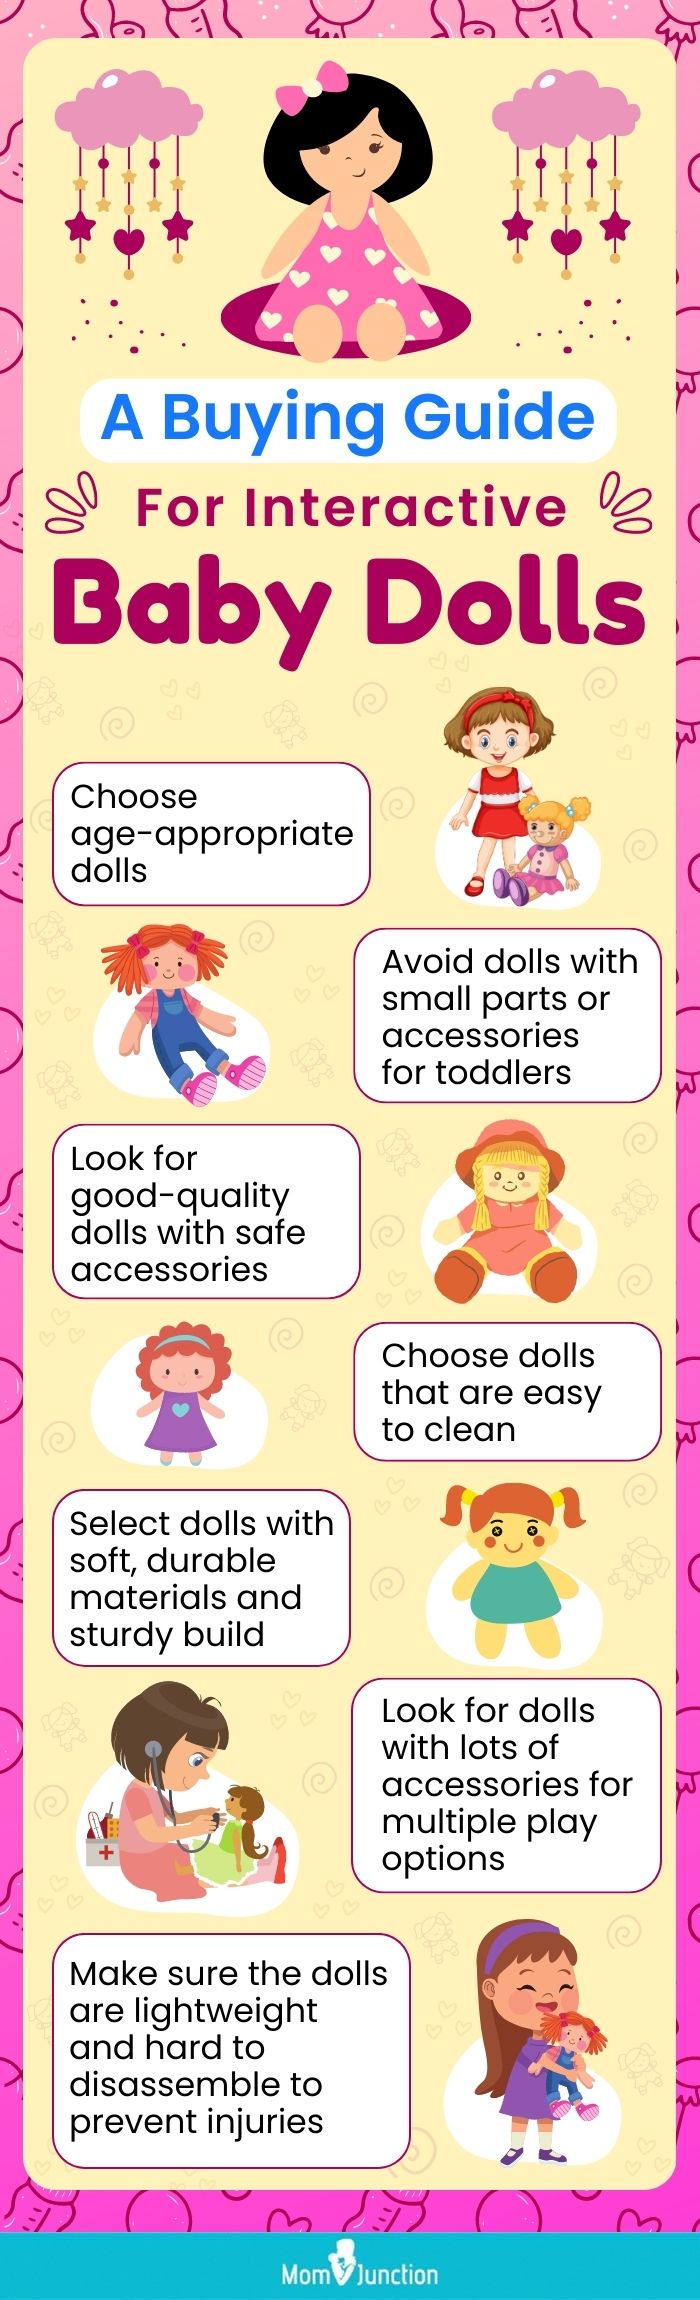 A Buying Guide For Interactive Baby Dolls.jpg (infographic)